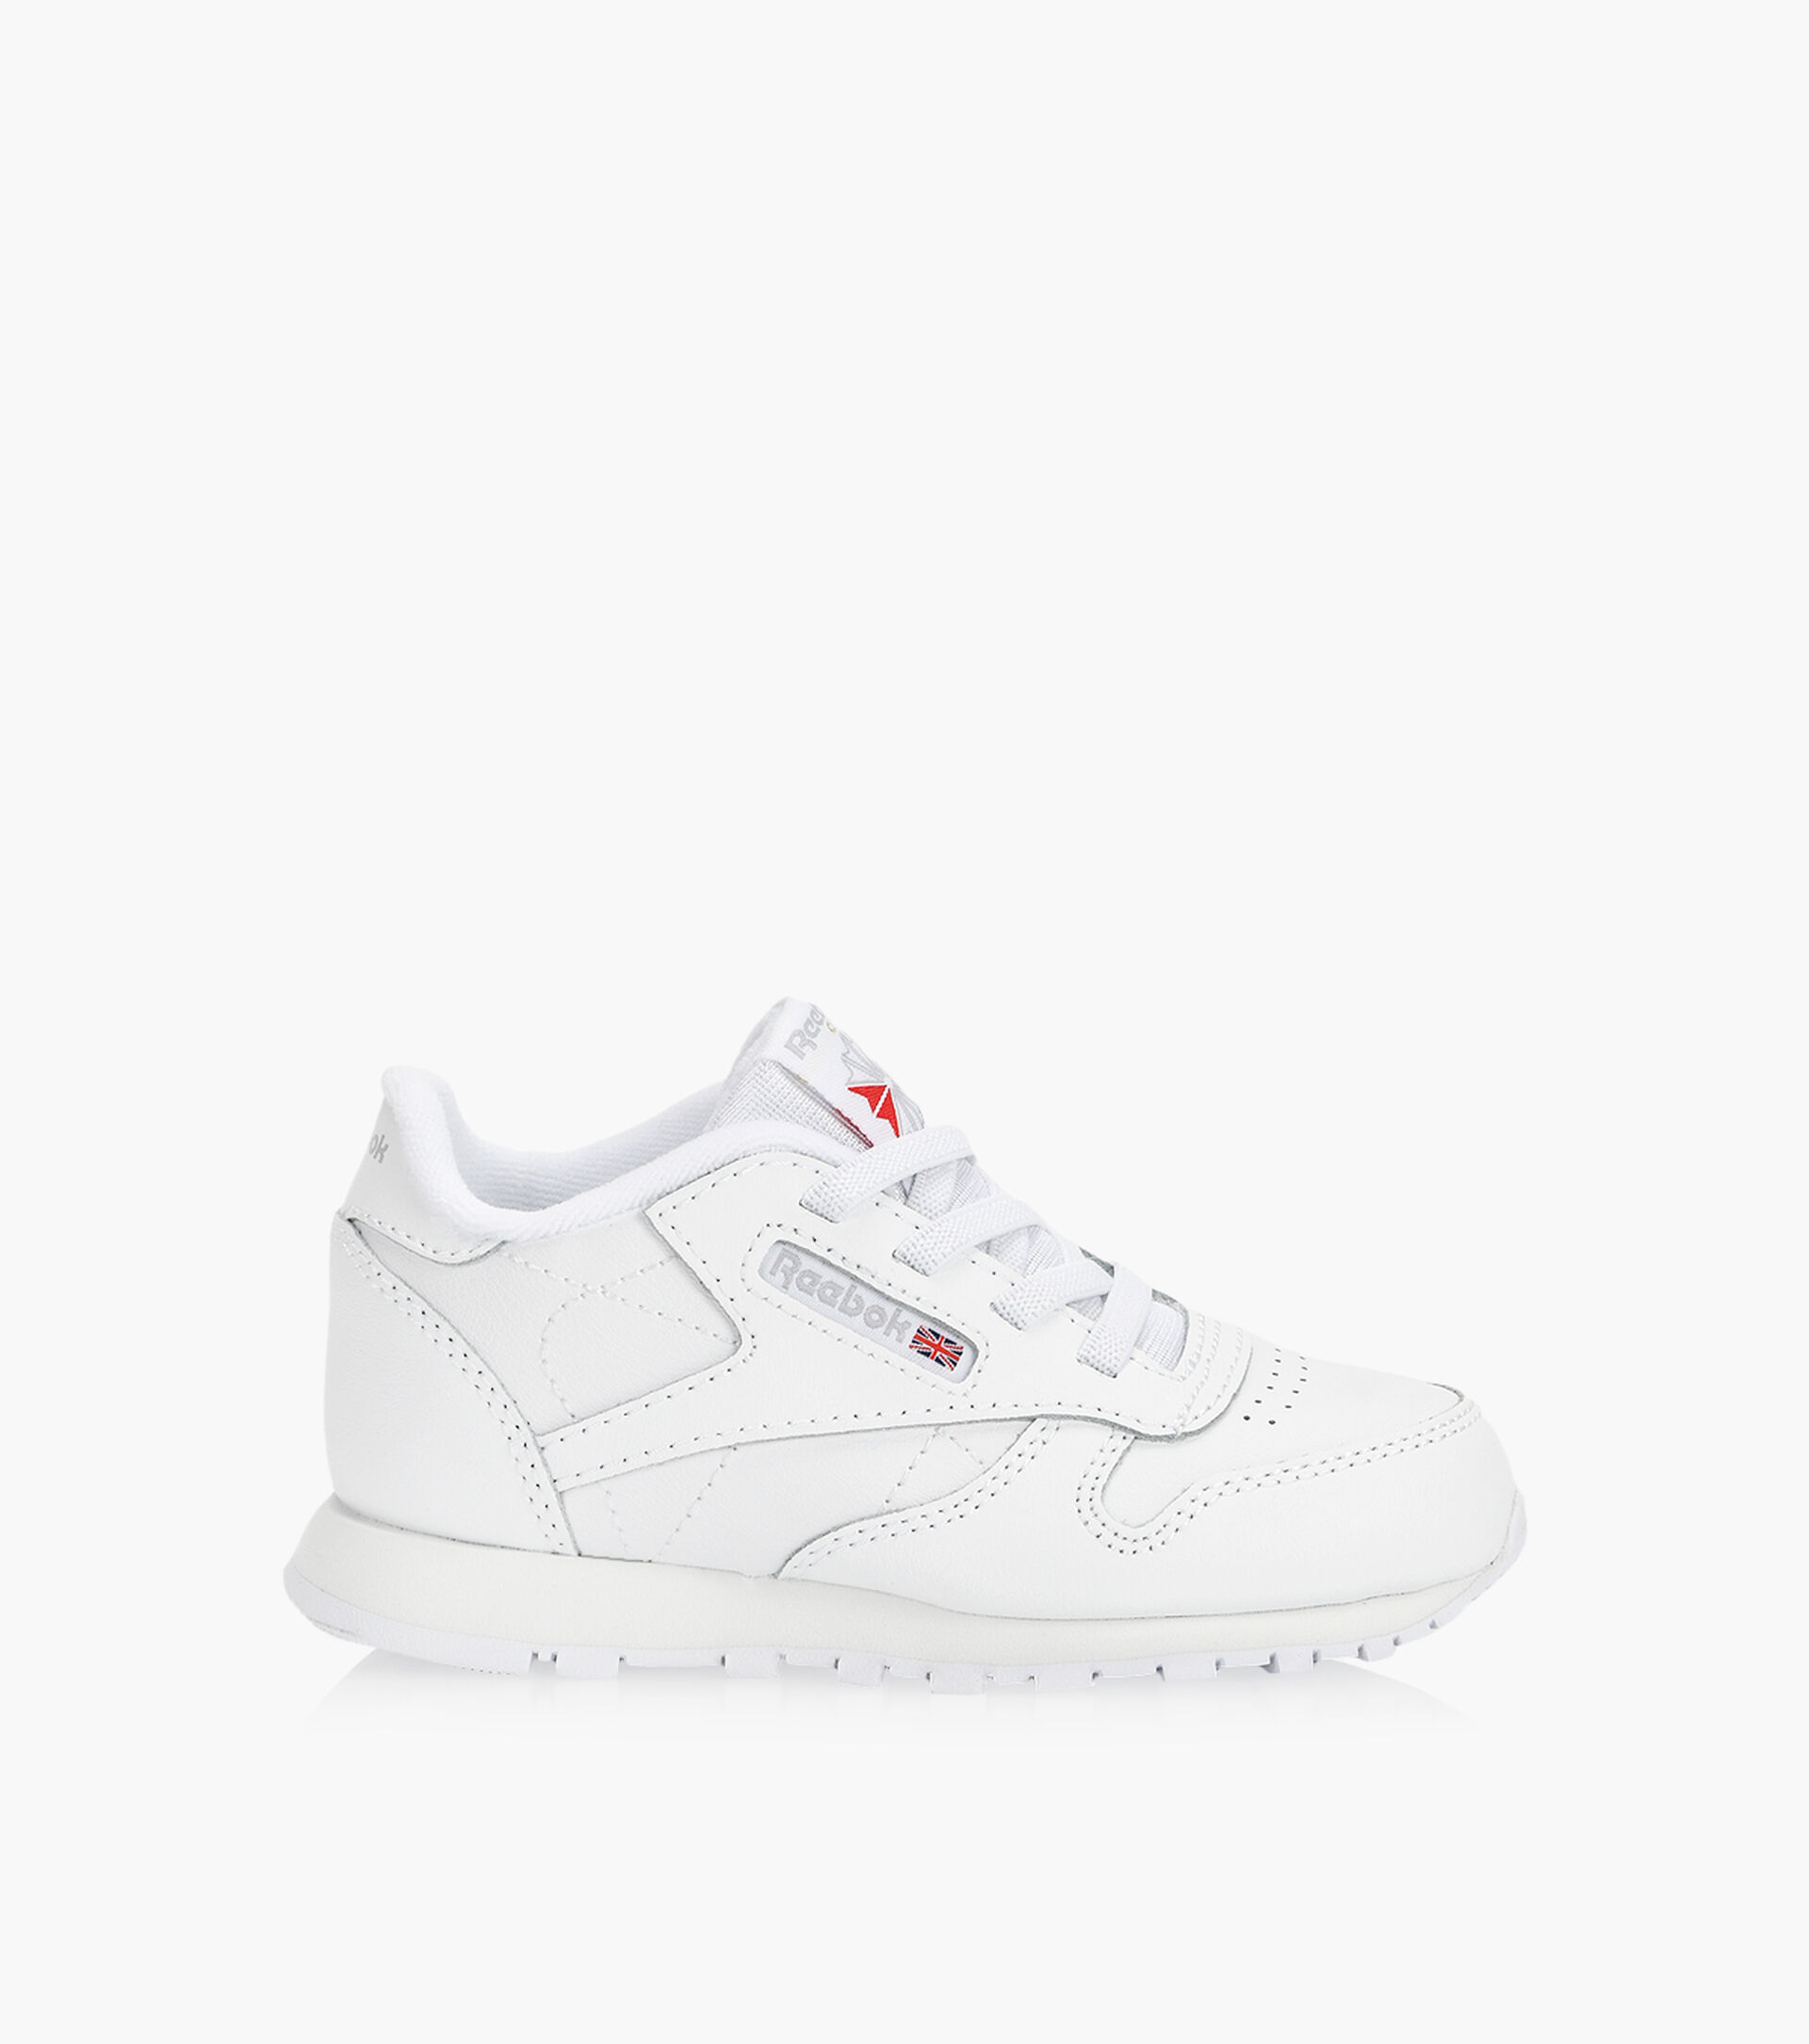 REEBOK CL LEATHER - White | Browns Shoes